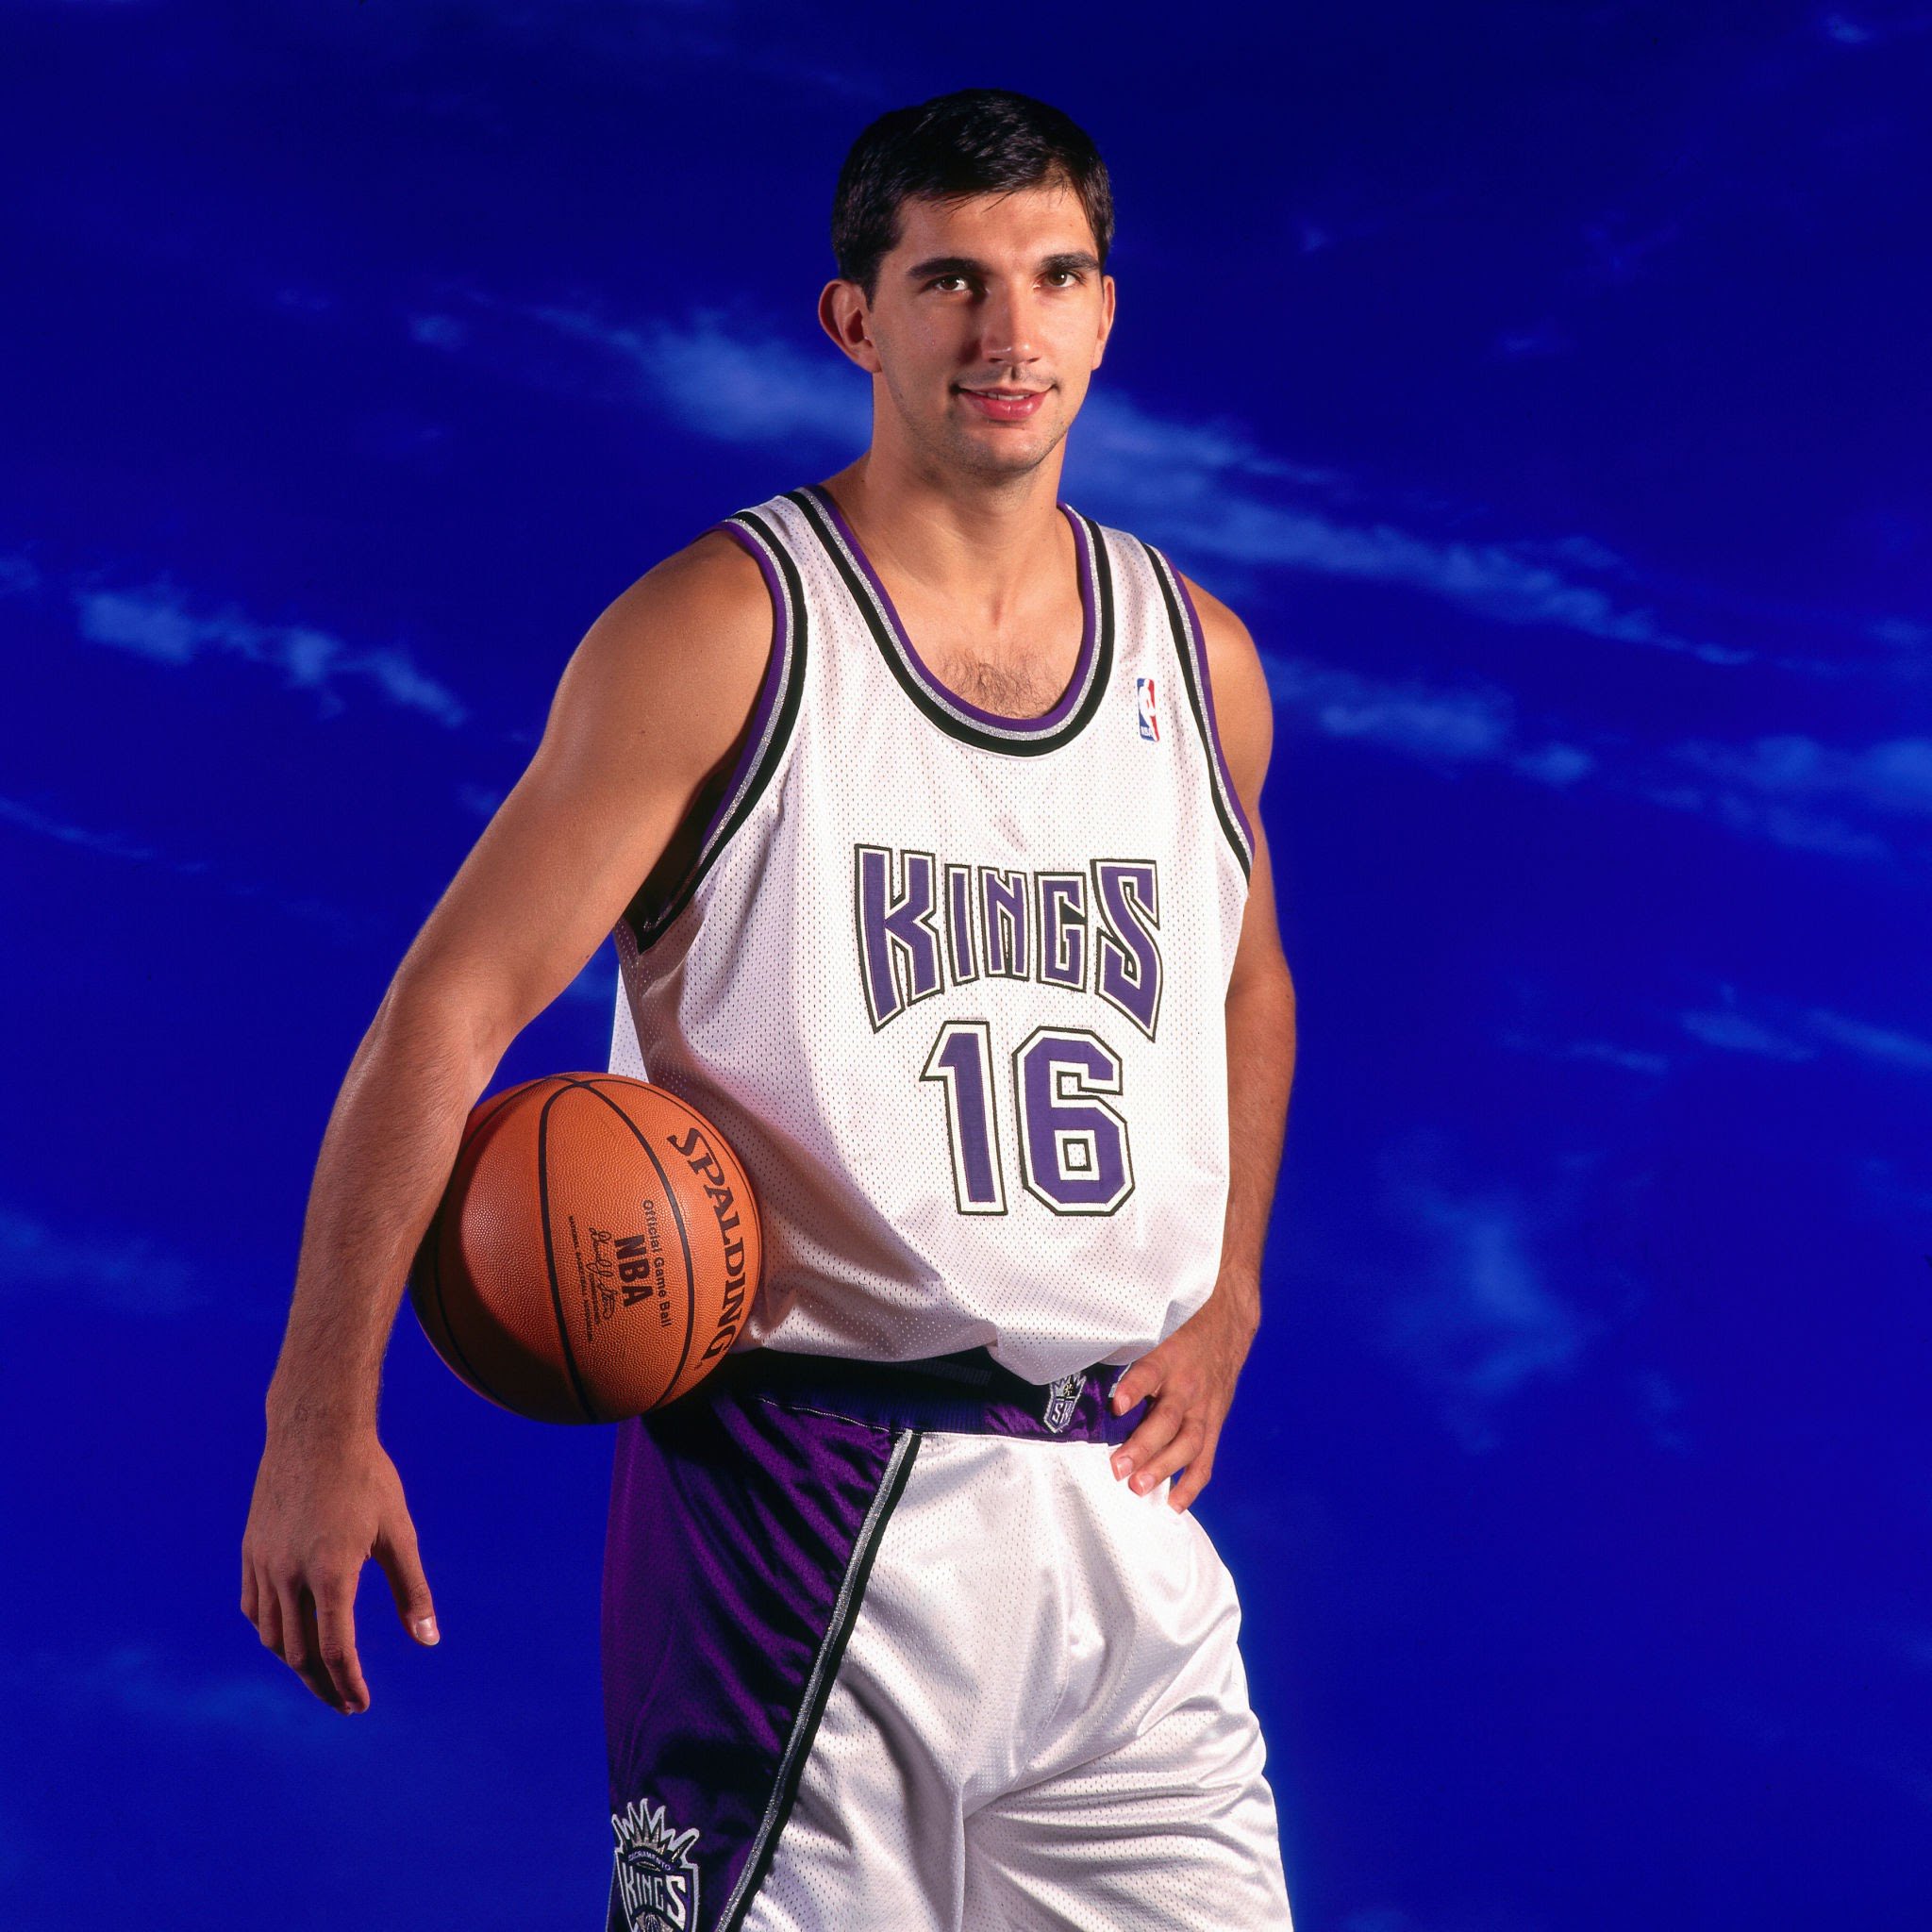 The Most Underrated NBA Players Of The Early 2000s